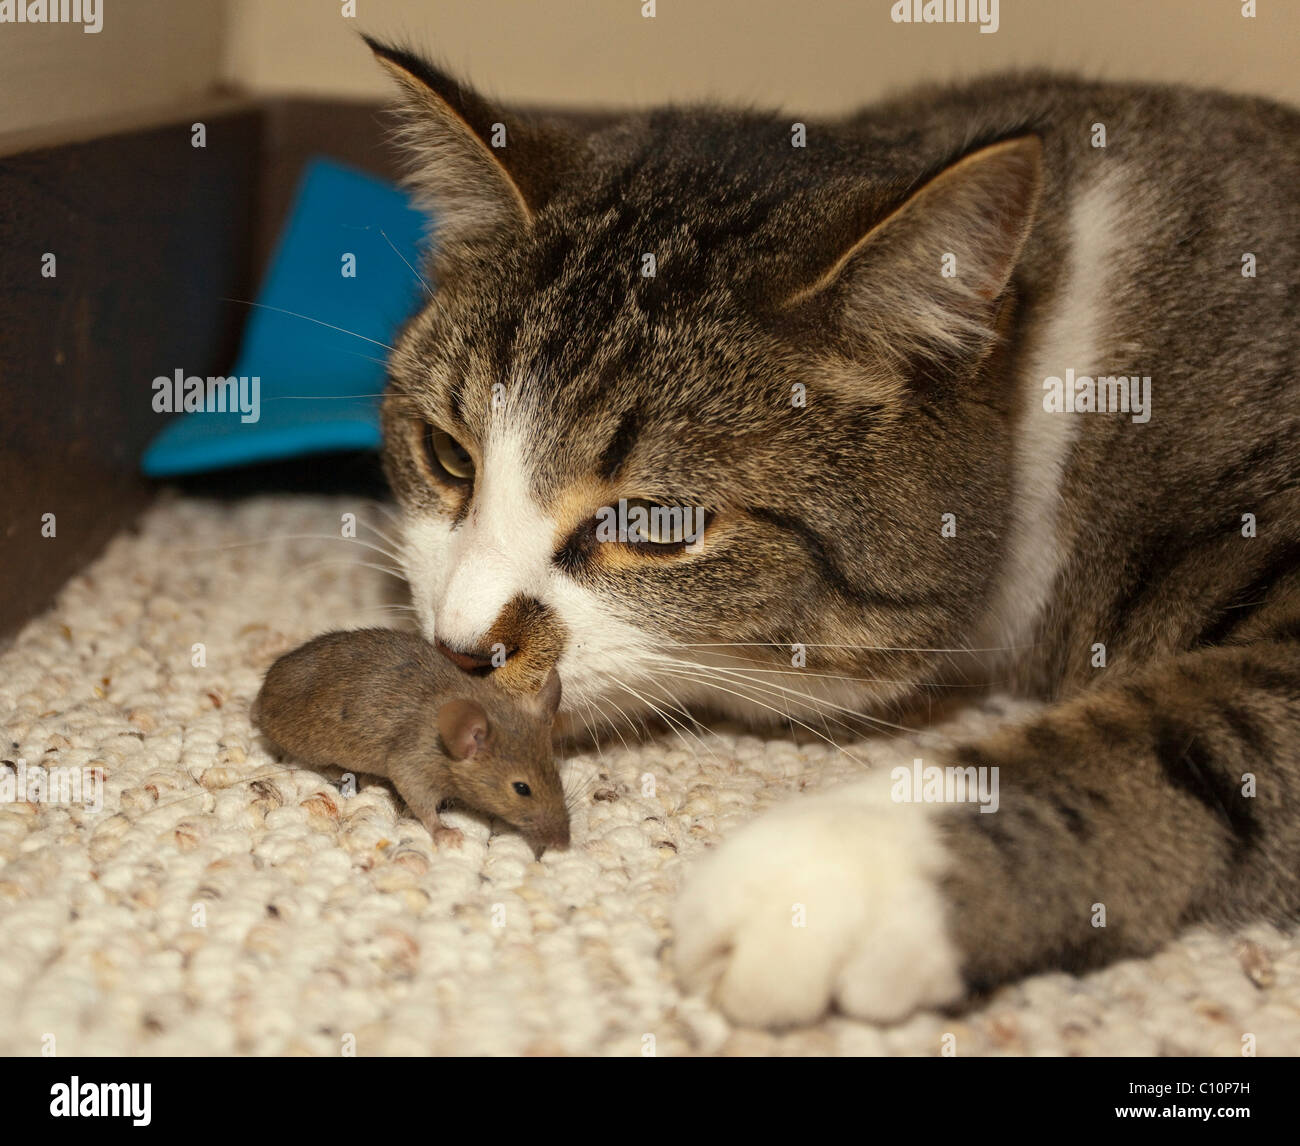 Domestic cat, housecat (Felis catus), catches, plays with Common house mouse (Mus musculus) Stock Photo